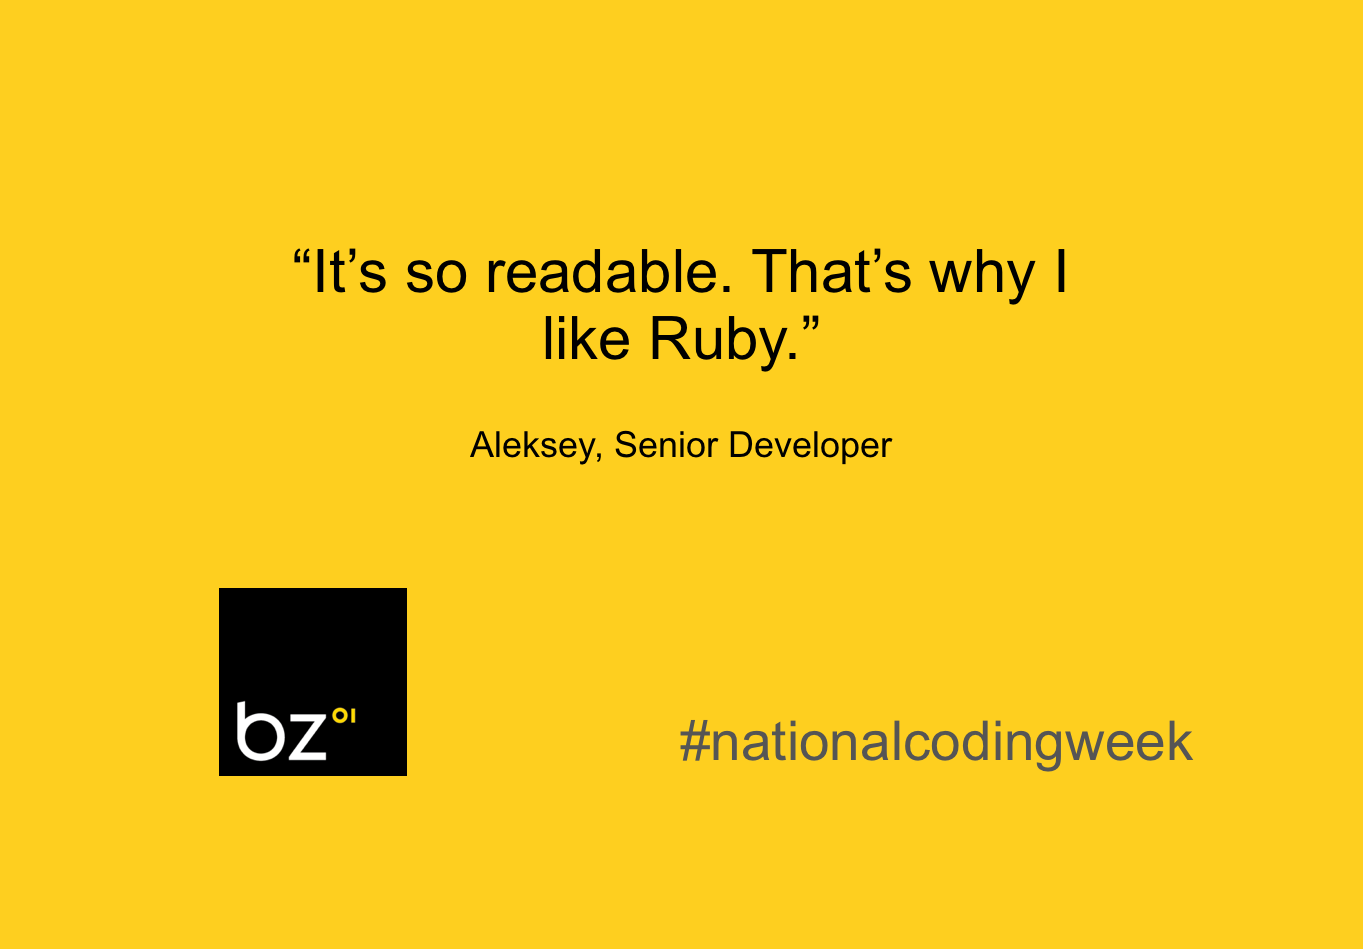 "It's so readable. That's why I like Ruby."